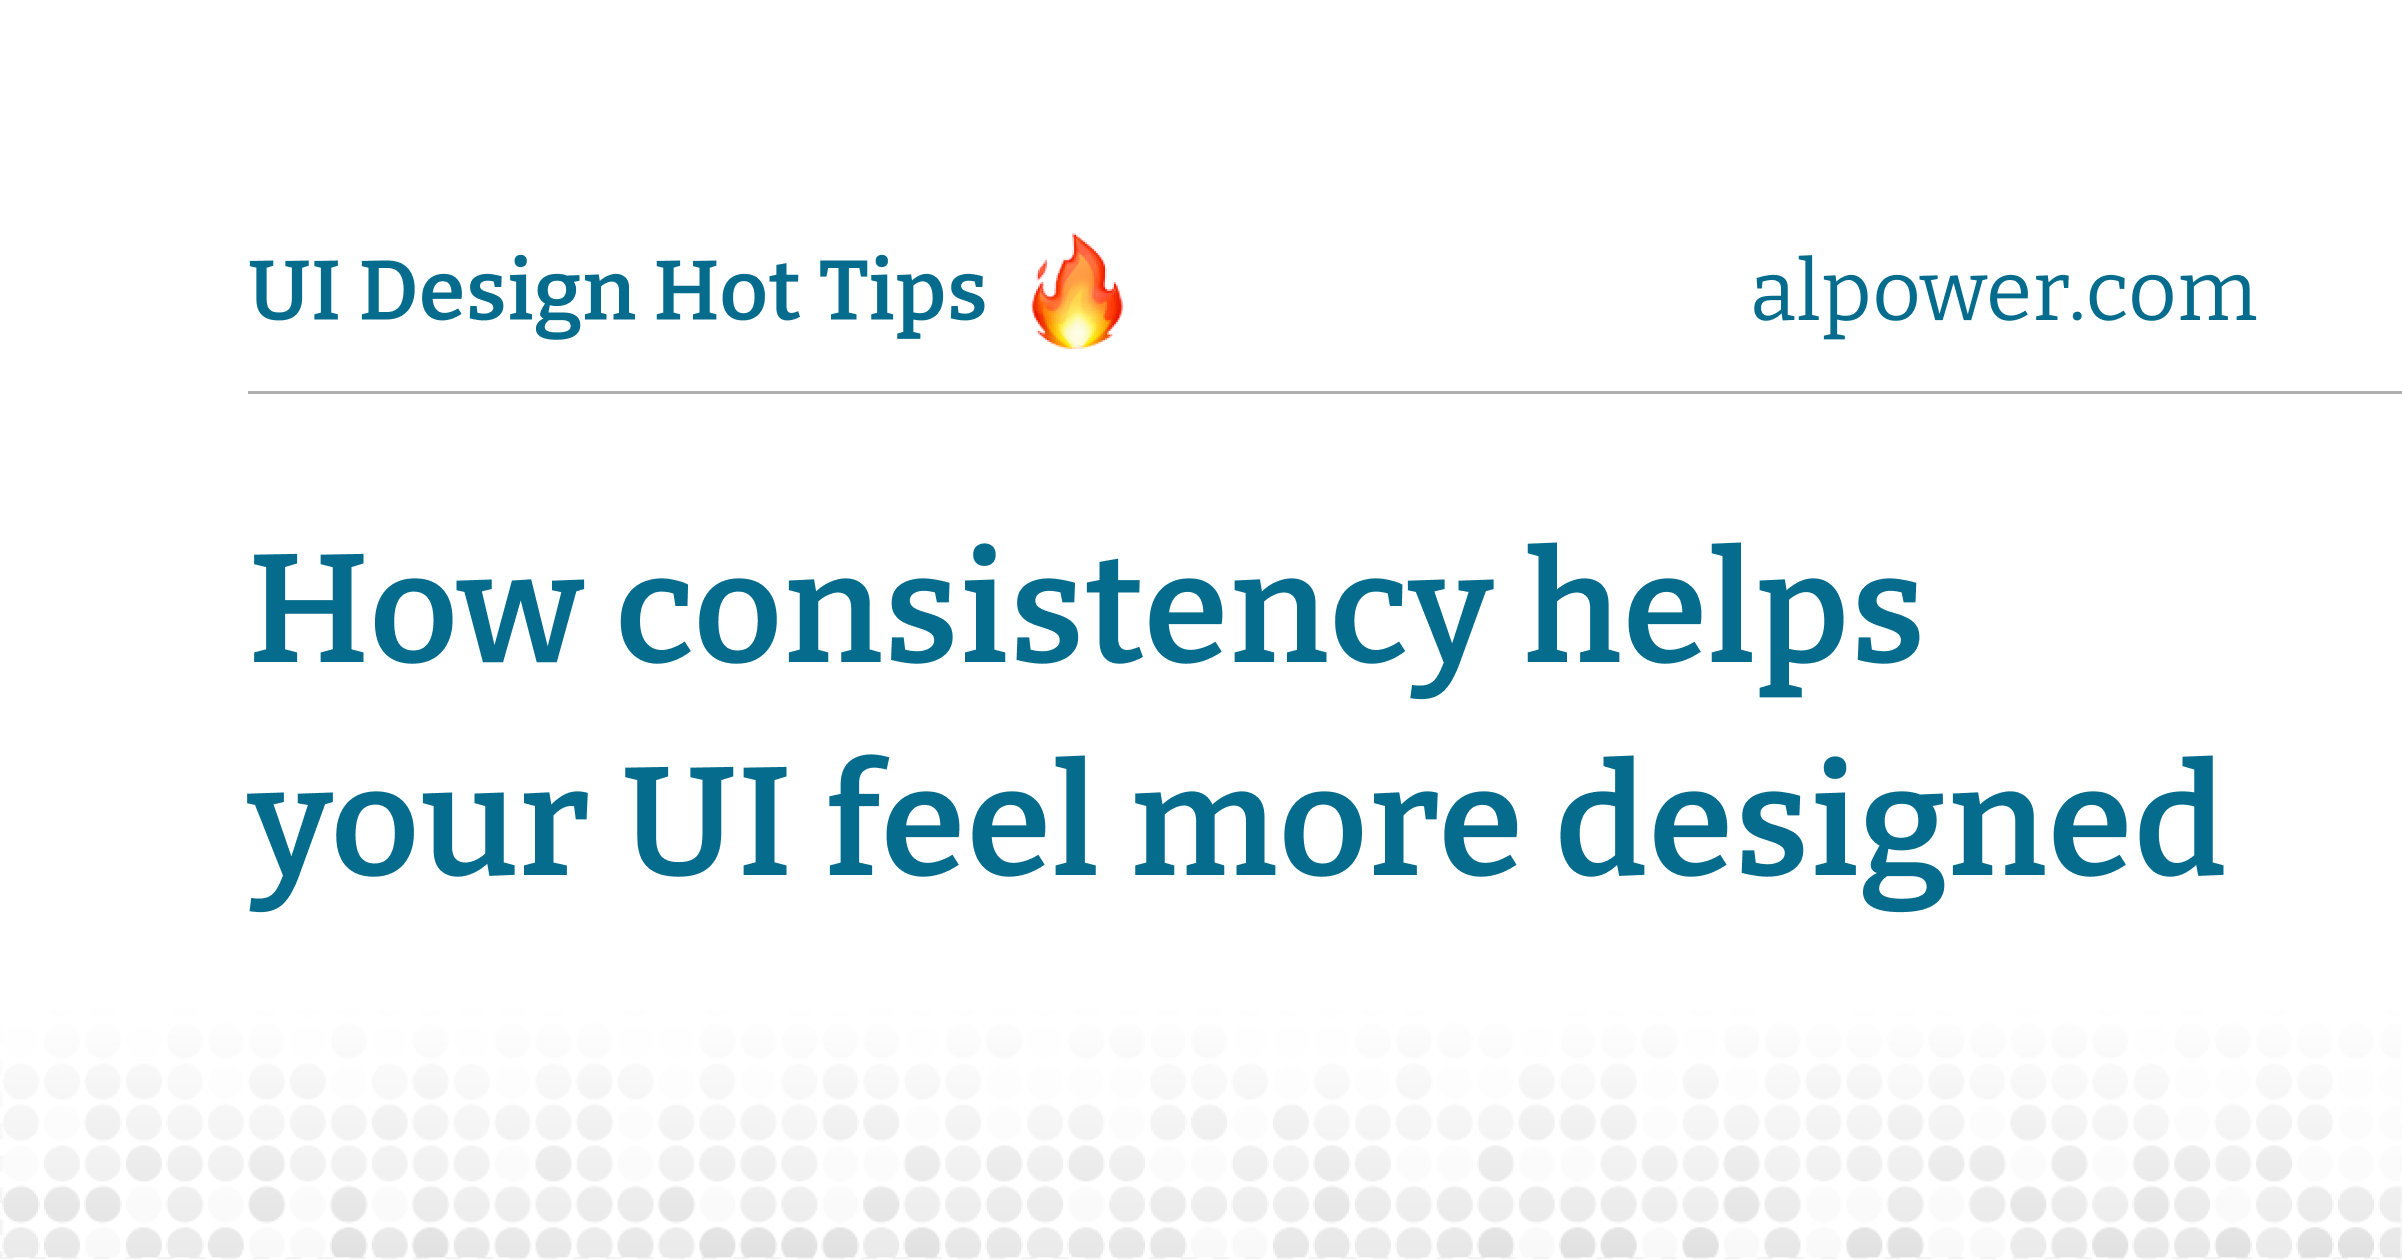 How consistency helps your UI feel more designed